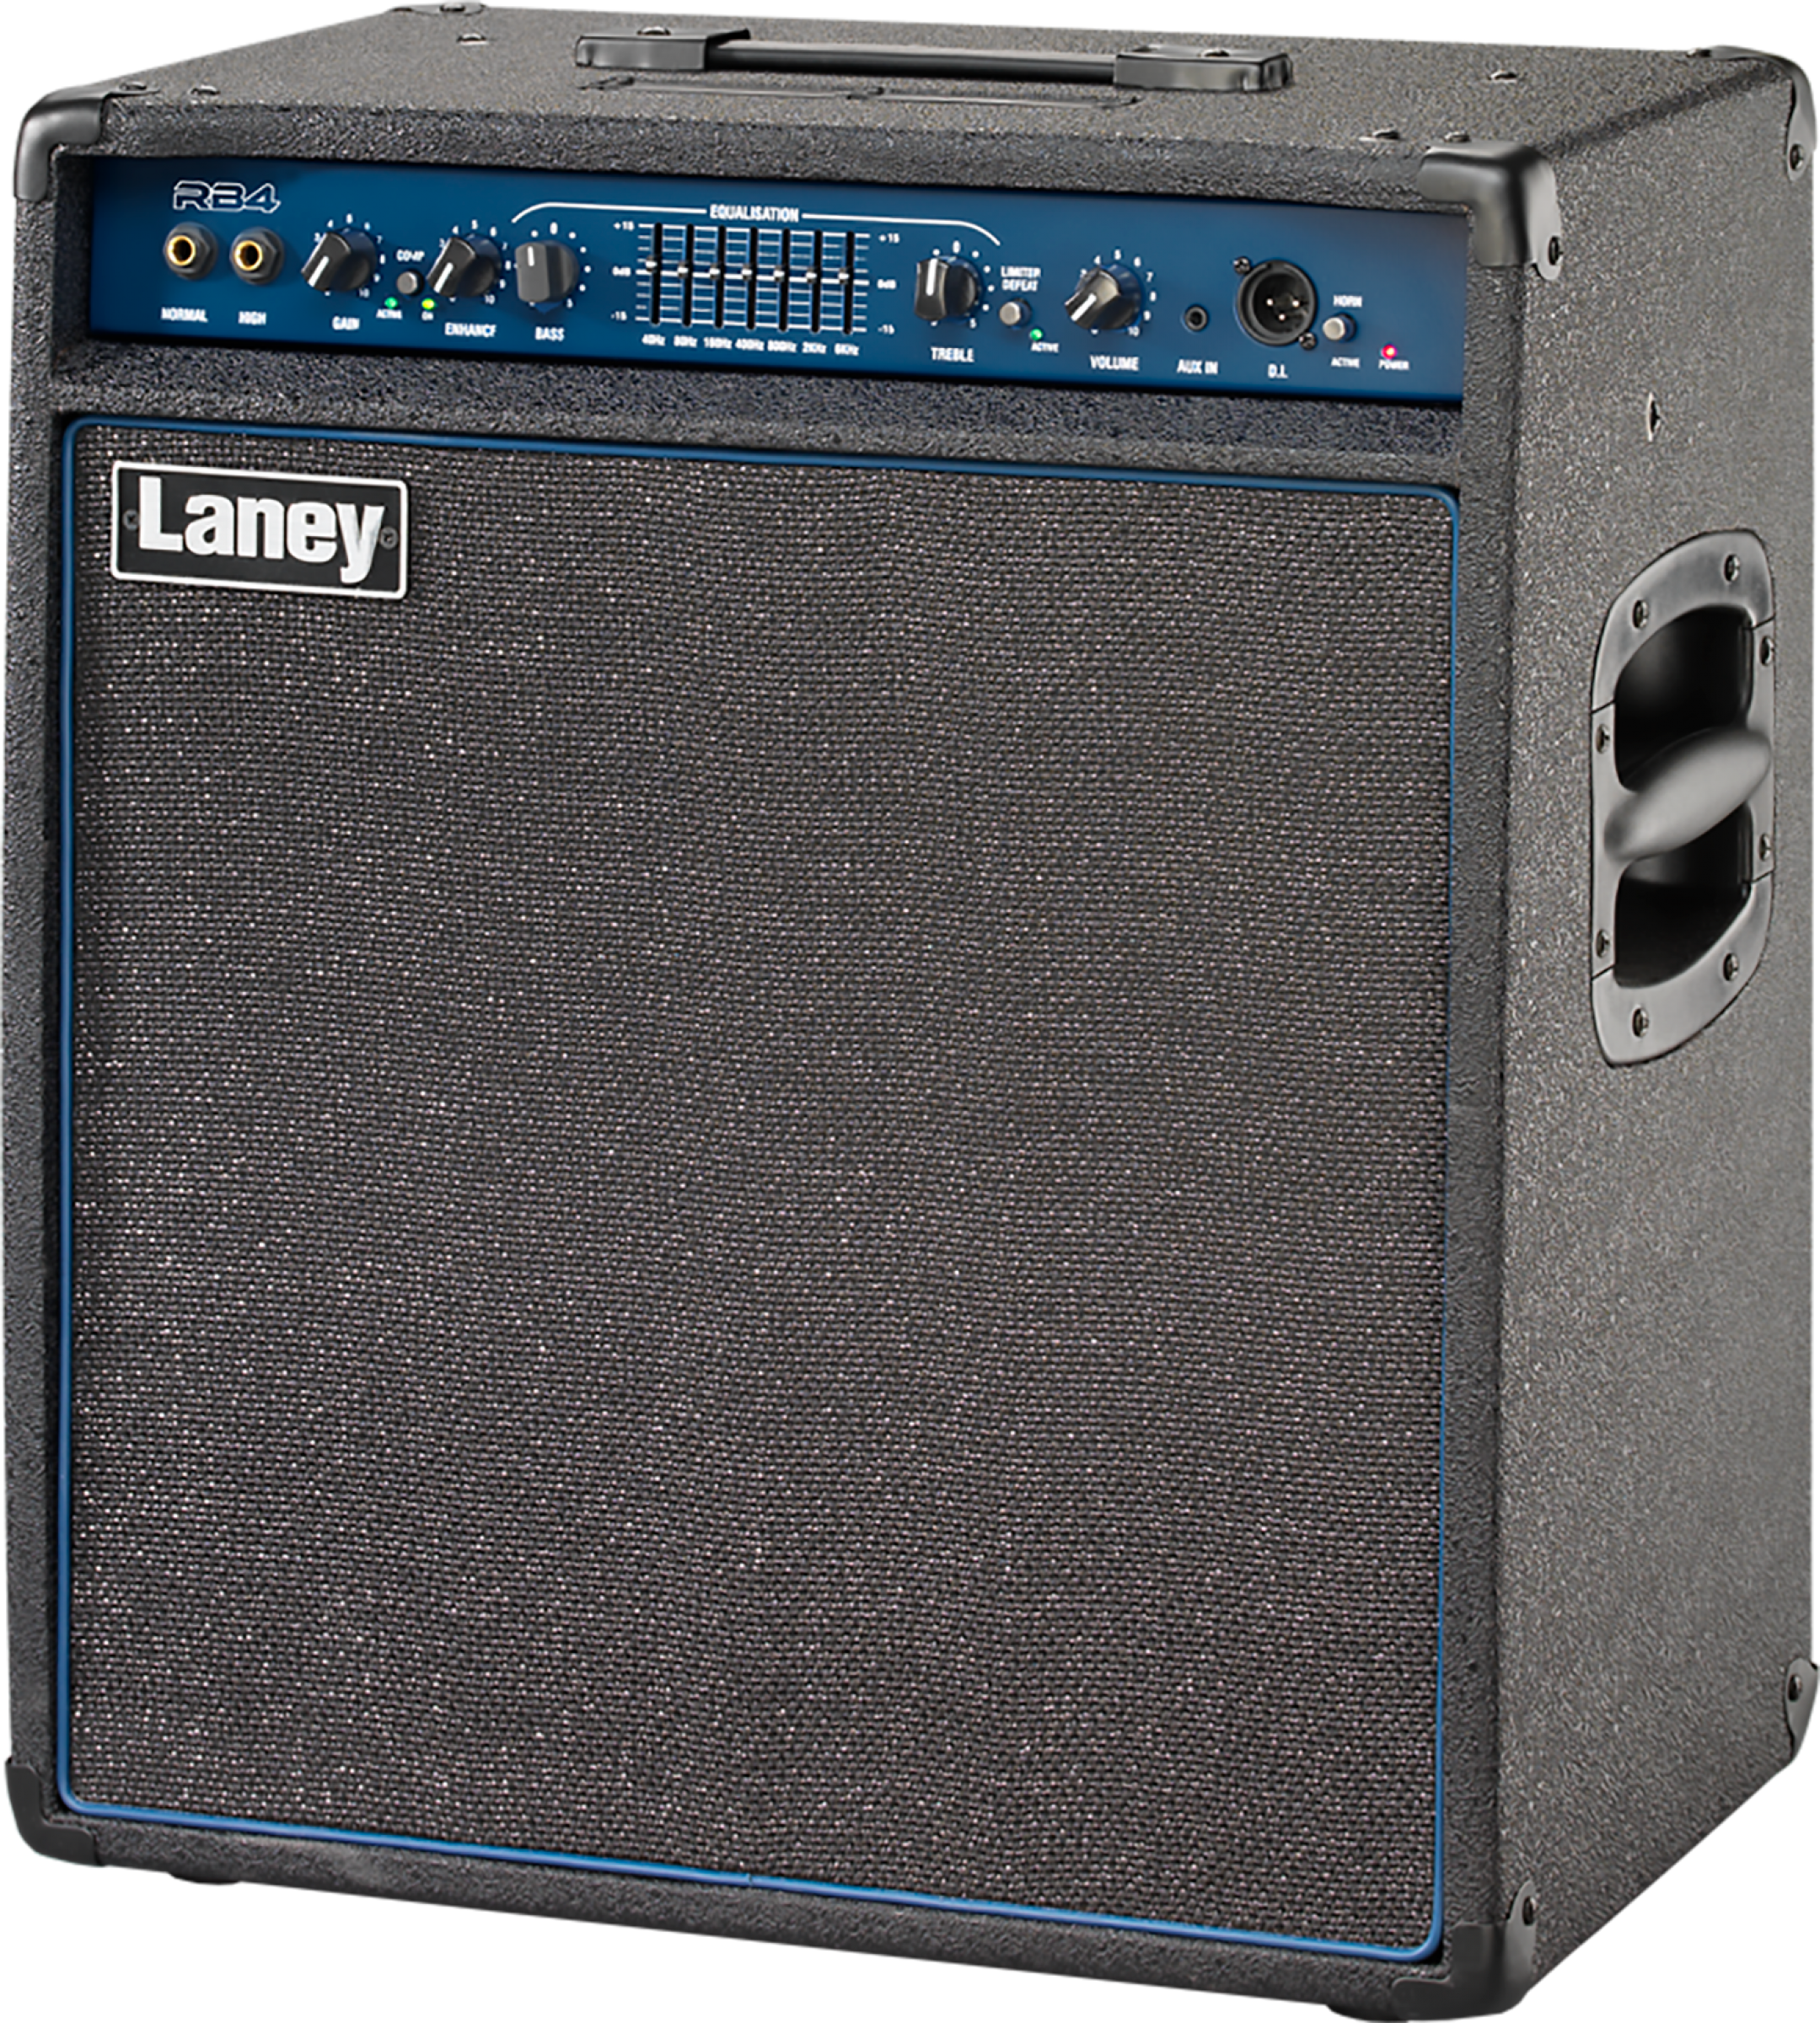 Laney Rb4 165w 1x15 - Bass Combo - Variation 2